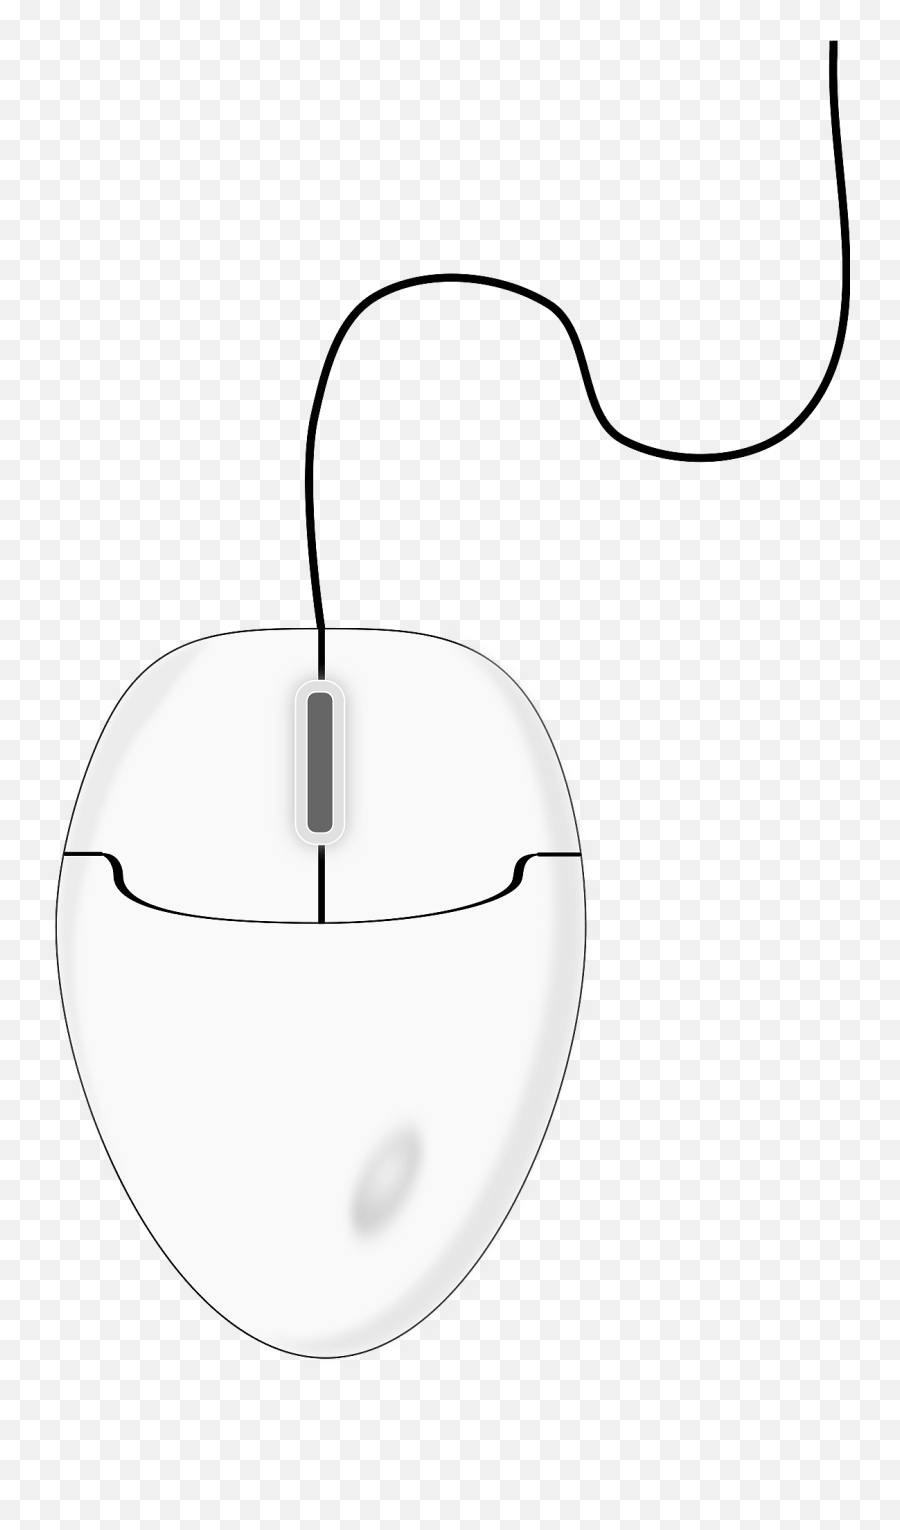 White Mouse Png Clip Art White Mouse Transparent Png Image - Solid Emoji,Mouse Clipart Black And White